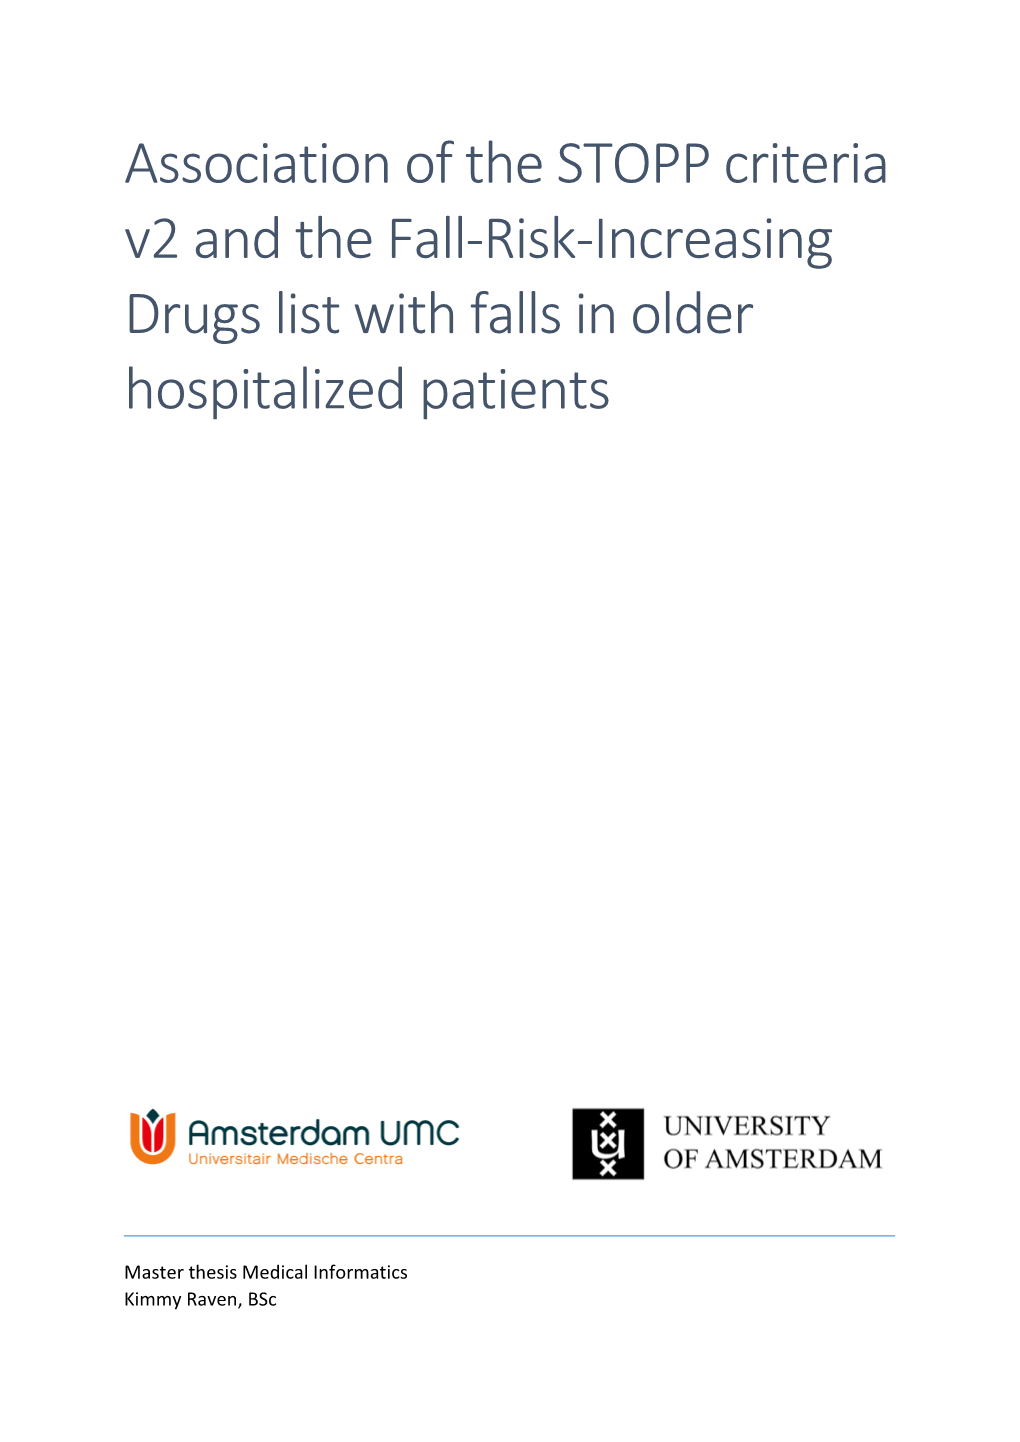 Association of the STOPP Criteria V2 and the Fall-Risk-Increasing Drugs List with Falls in Older Hospitalized Patients